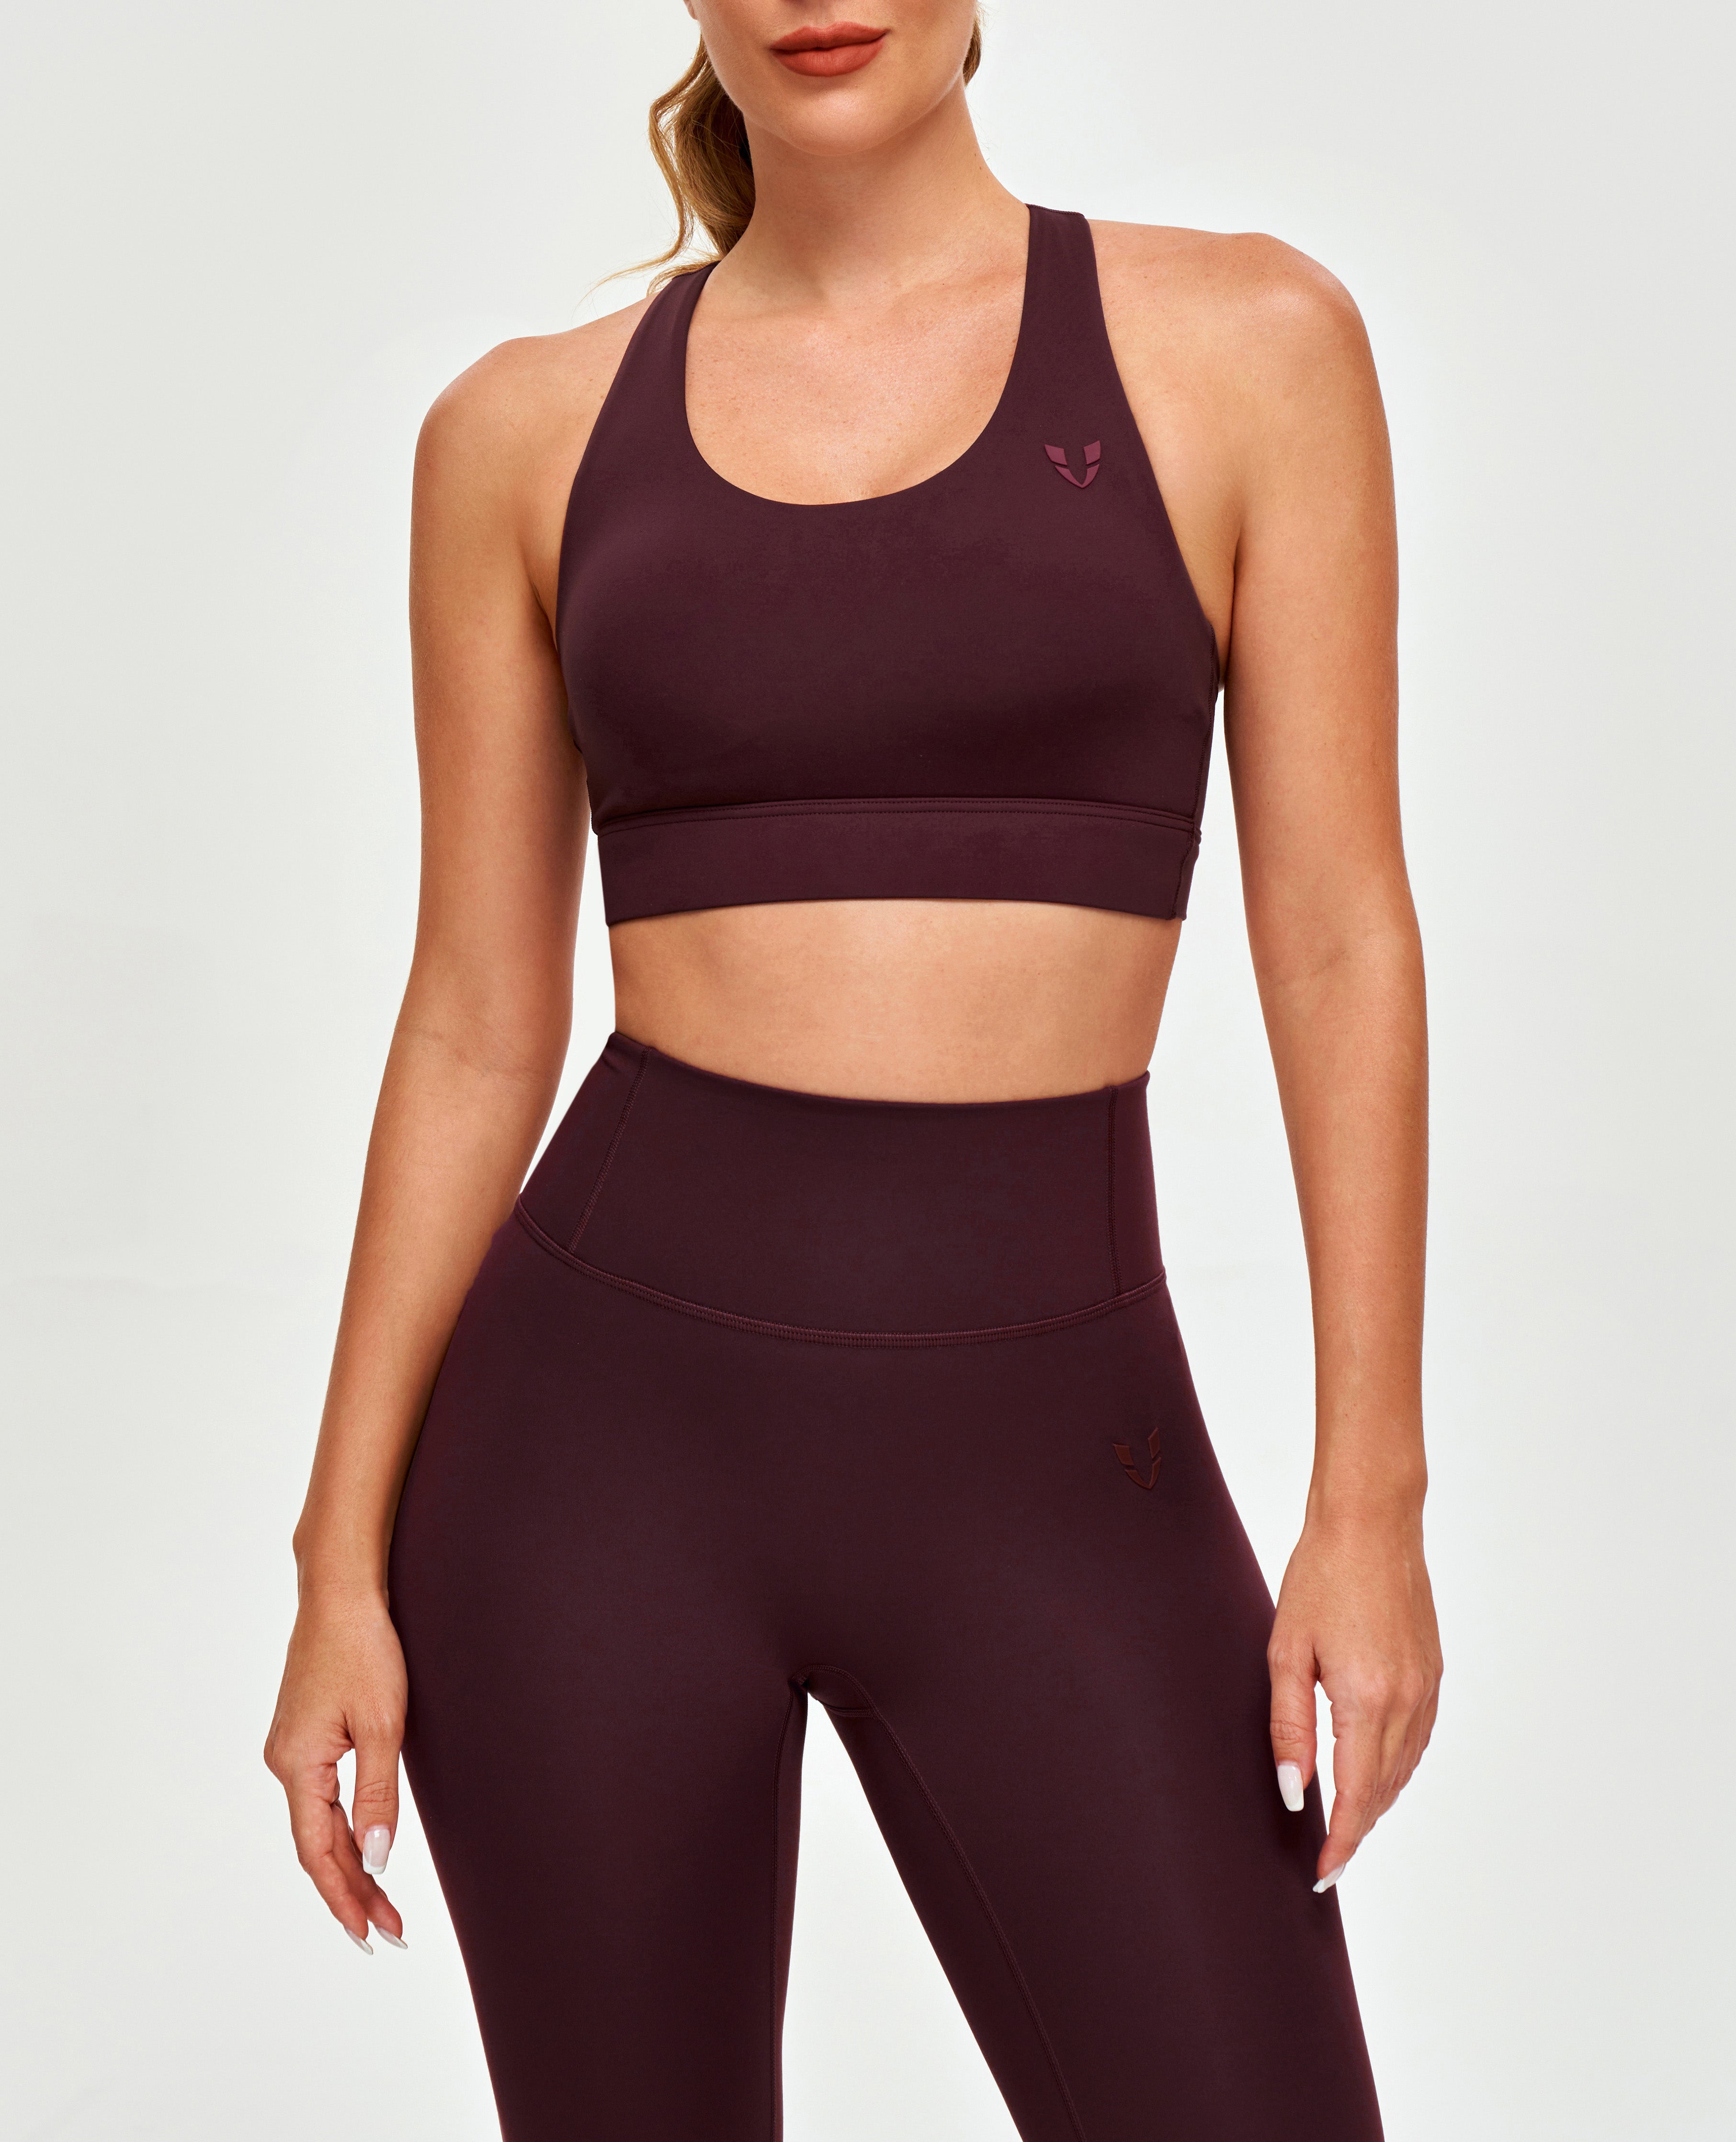 Size Chart, Leggings and Sports Bras